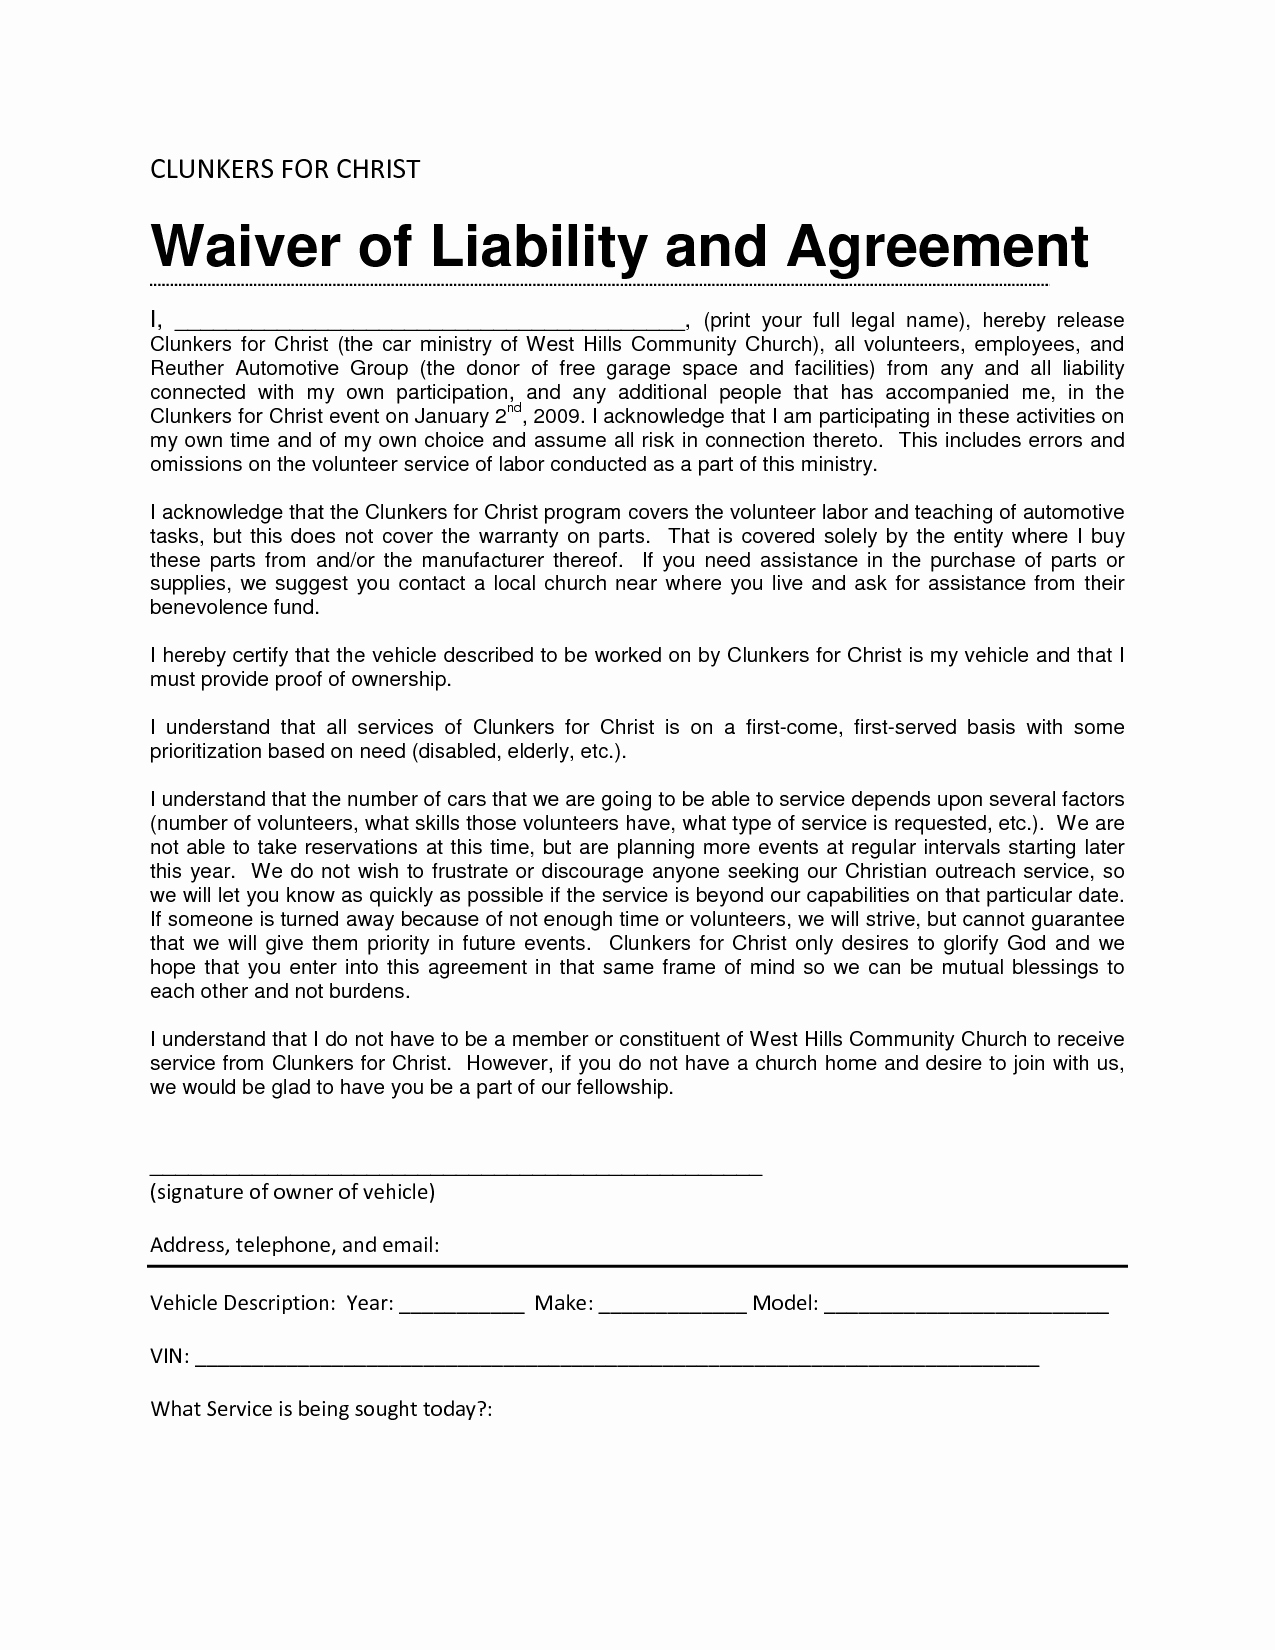 Liability Release Agreement Liability Waiver Form Template Awesome 6 Release Of Liability